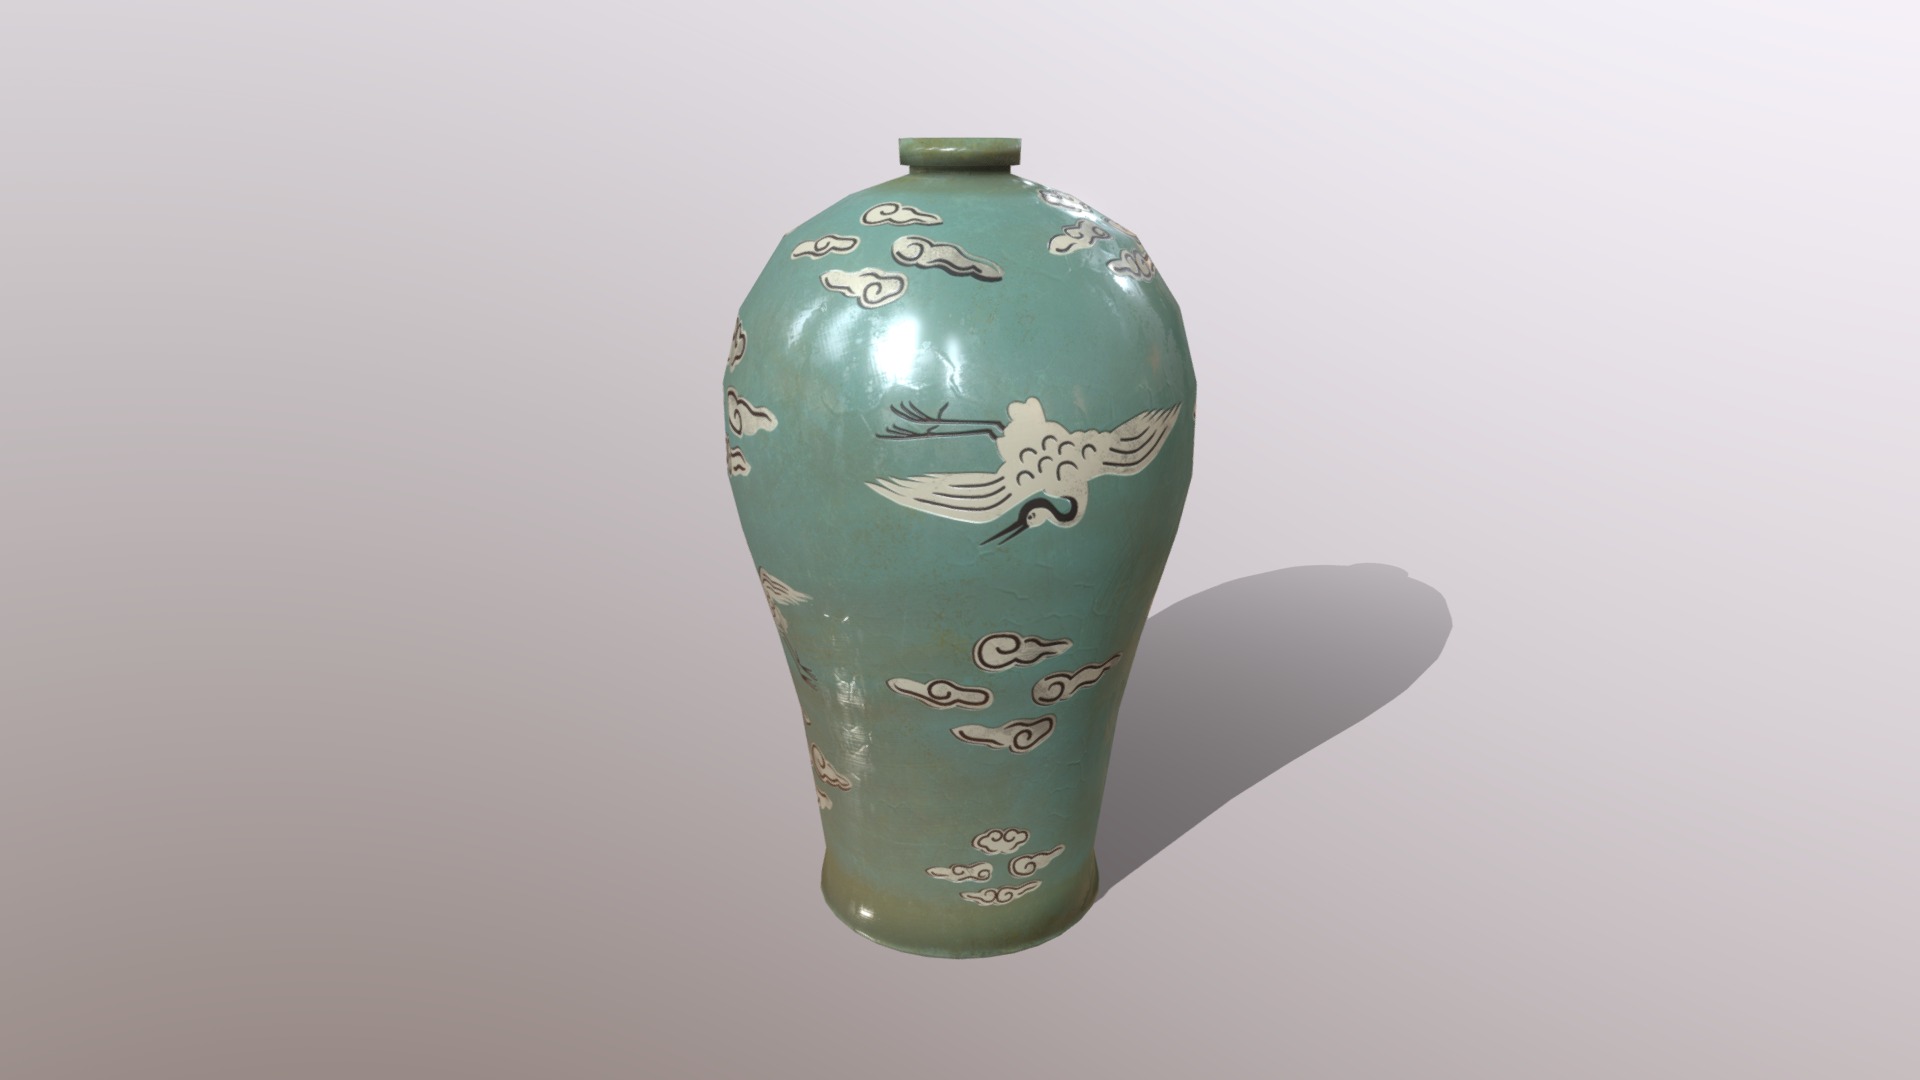 3D model Maebyeong with Cranes and Clouds + ALPHA VECTORS - This is a 3D model of the Maebyeong with Cranes and Clouds + ALPHA VECTORS. The 3D model is about a green vase with a handle.